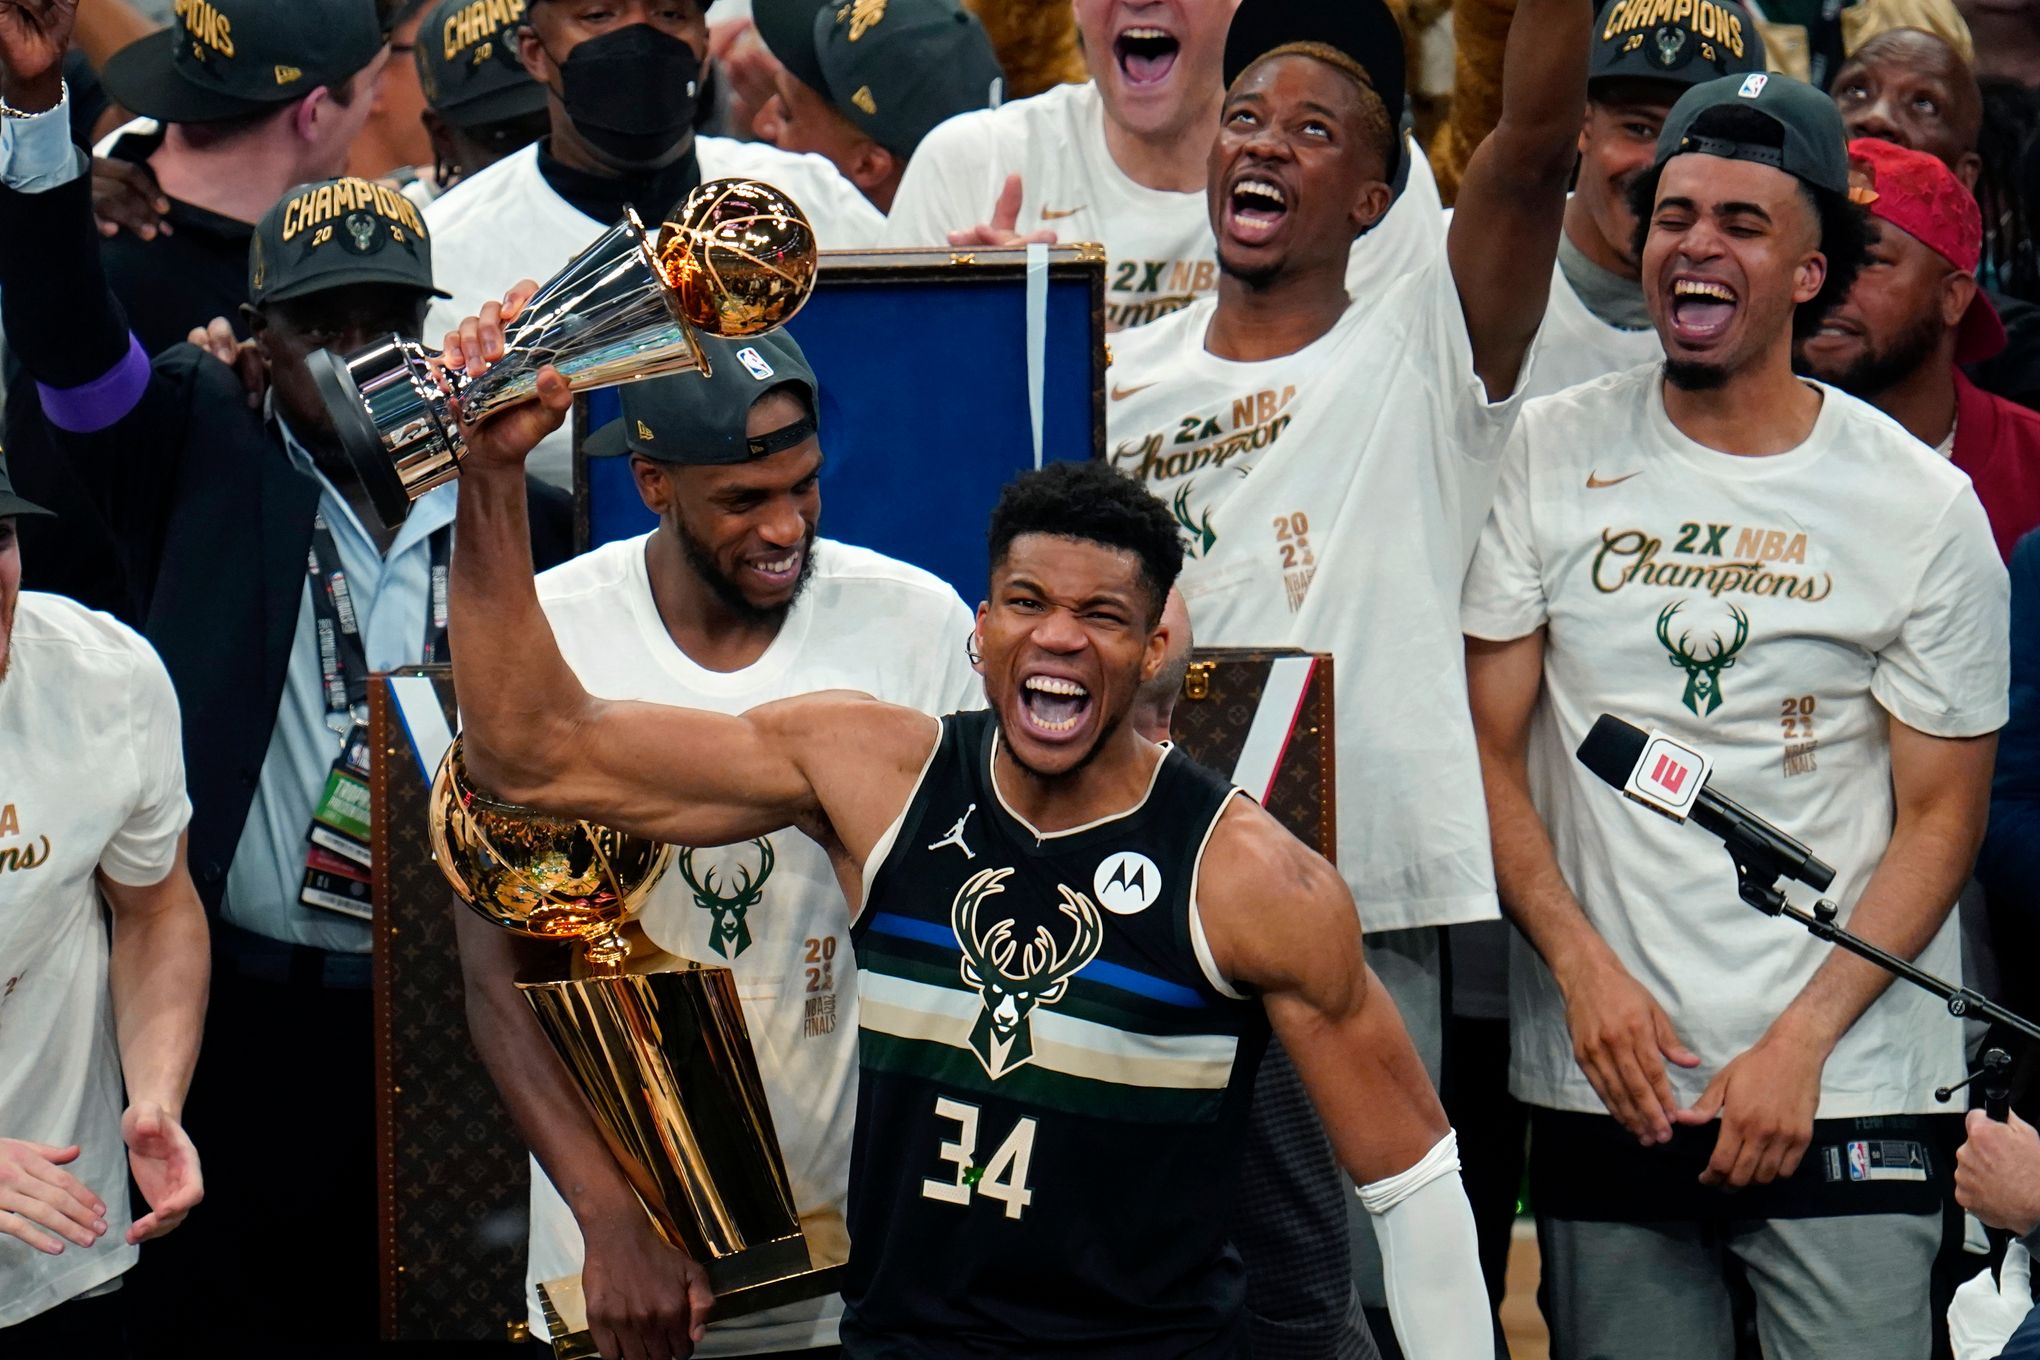 Bucks' fans celebrate NBA championship with parade in Milwaukee streets